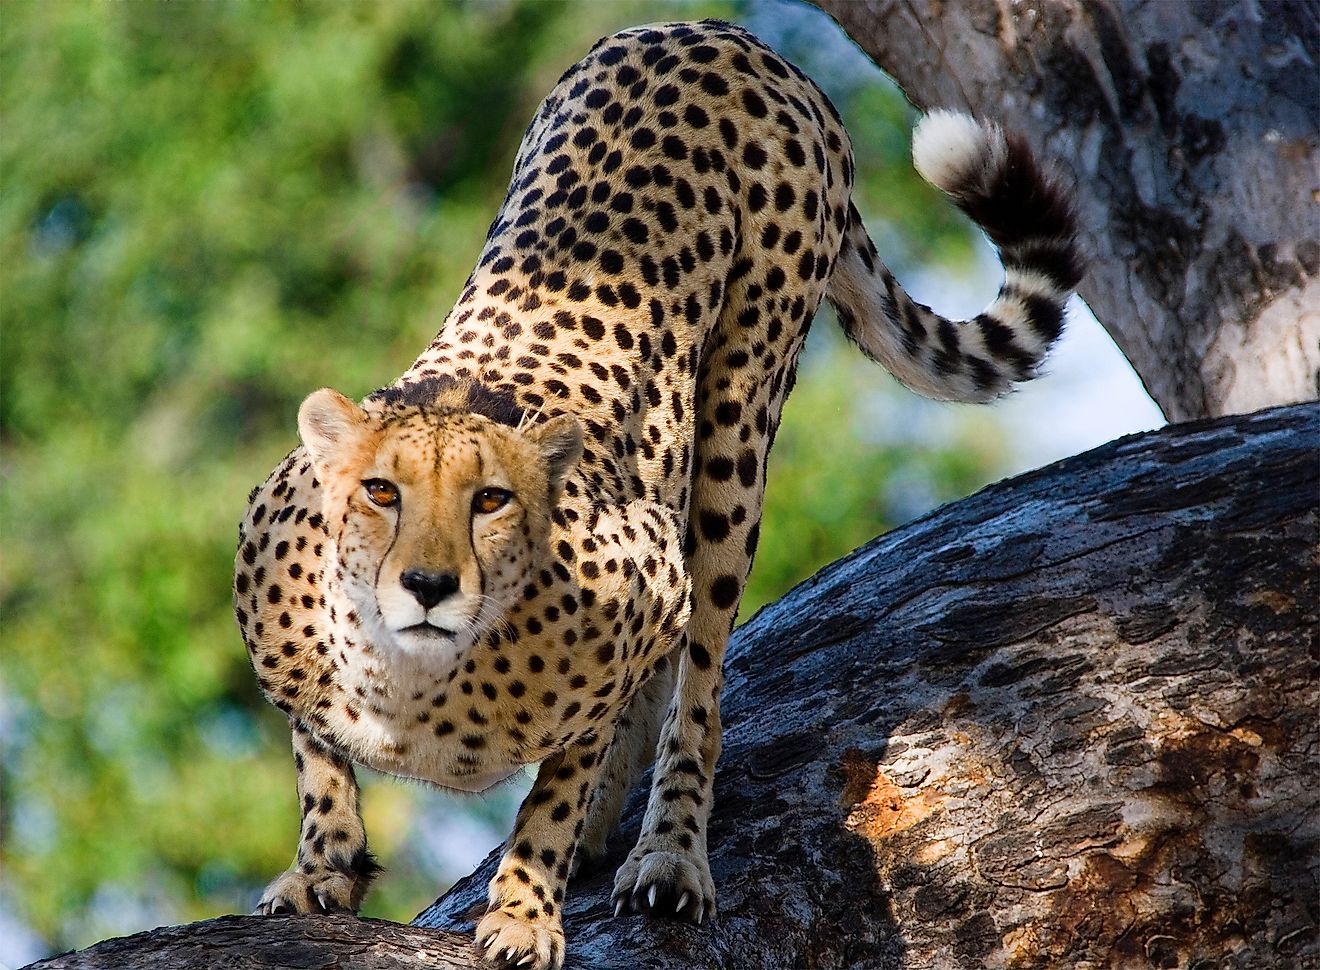 what-are-the-differences-between-asiatic-cheetahs-and-african-cheetahs-worldatlas